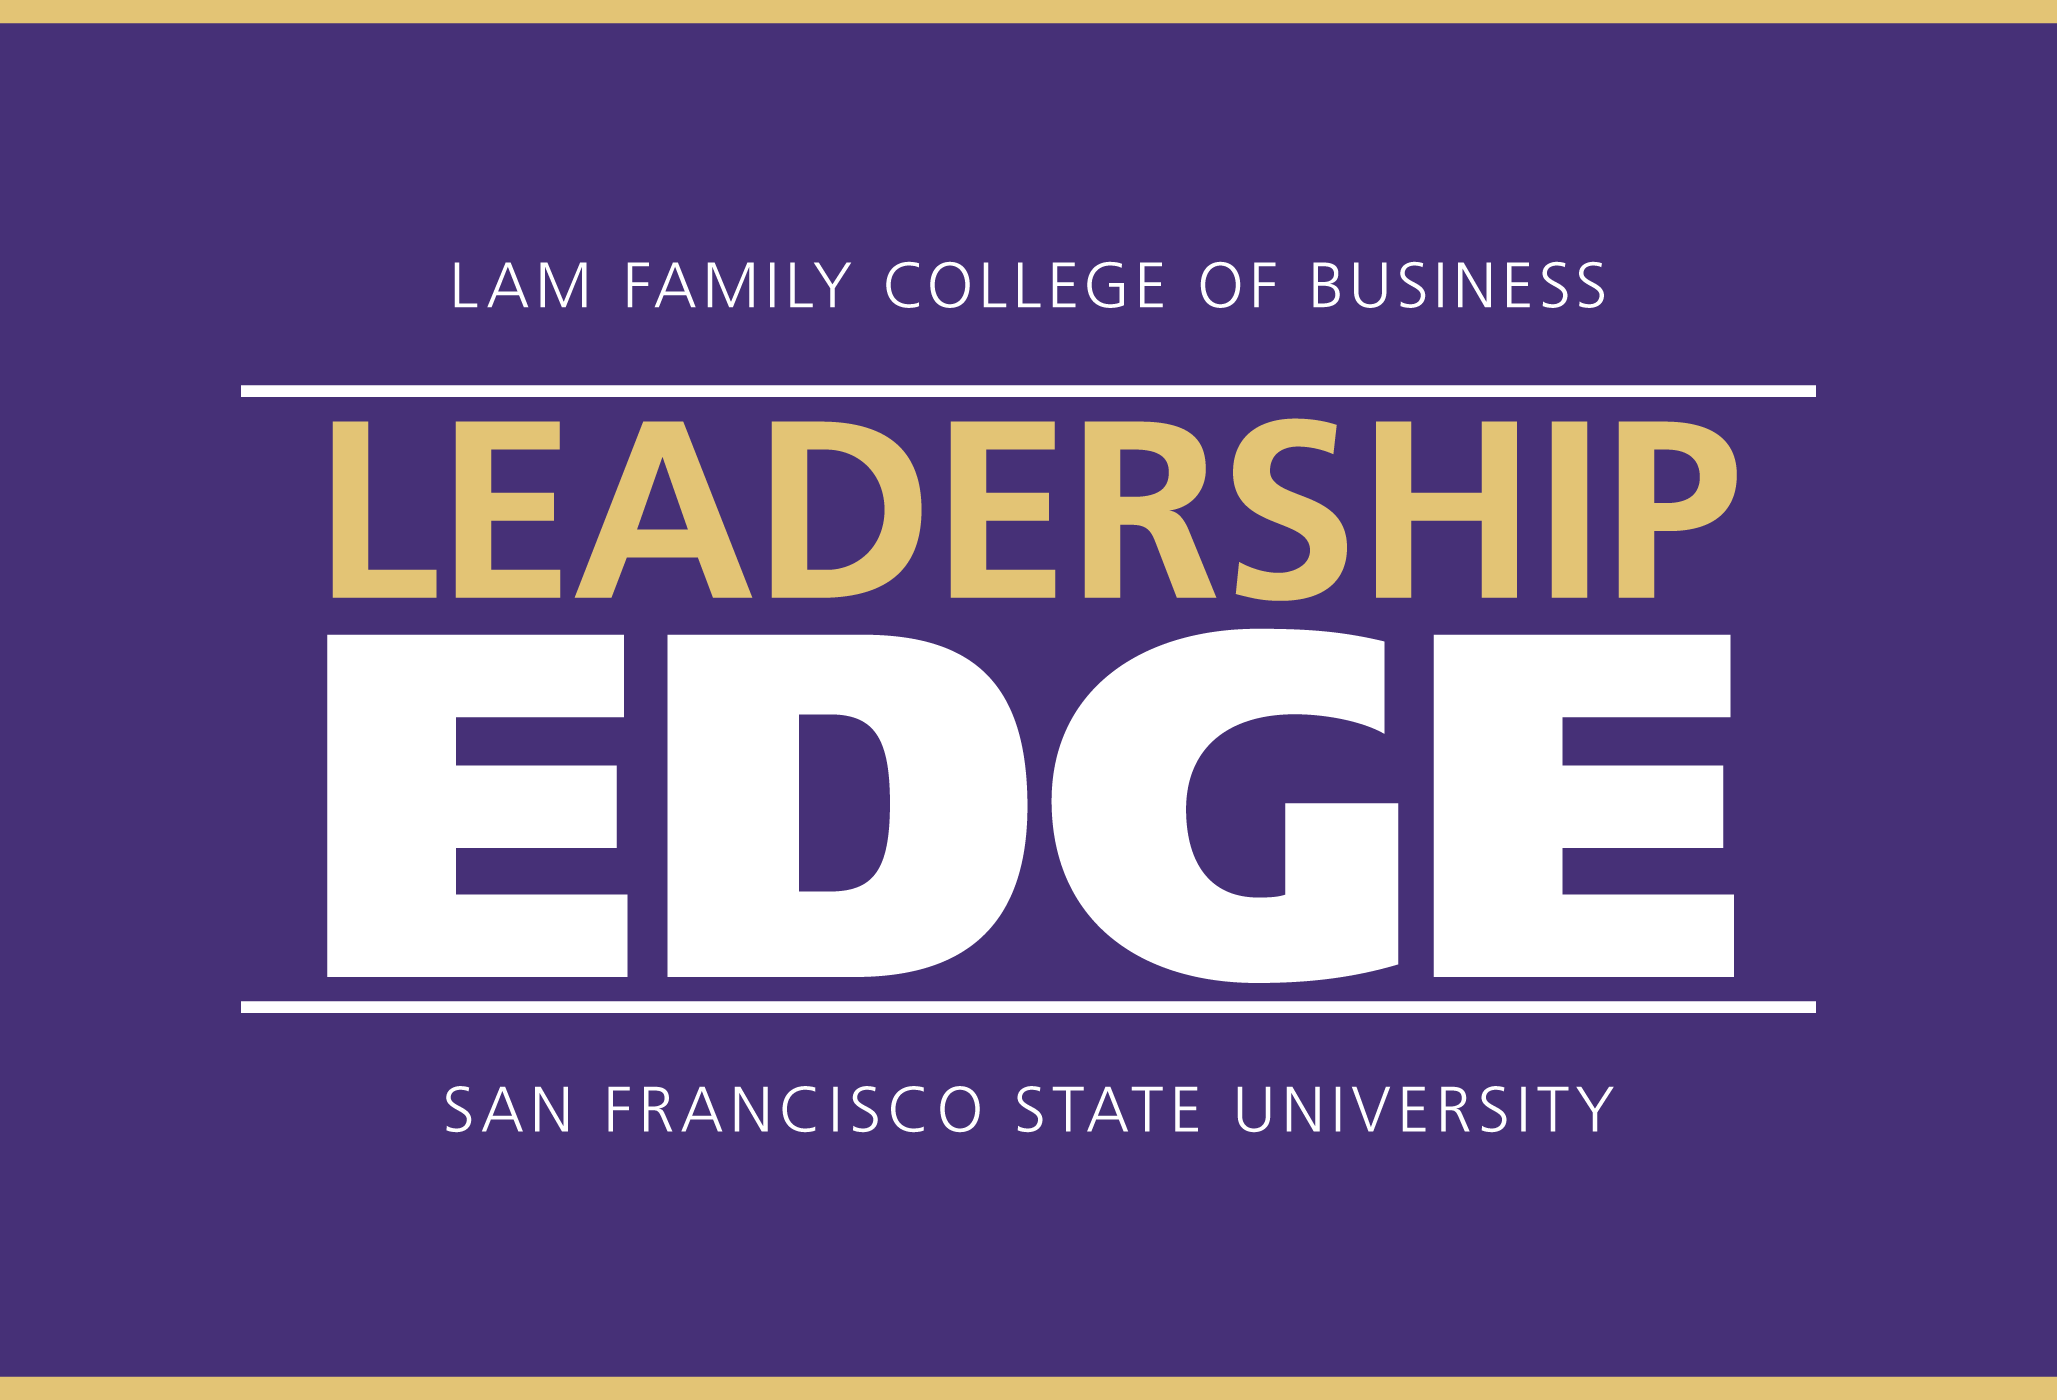 Lam Family College of Business Leadership EDGE San Francisco State University